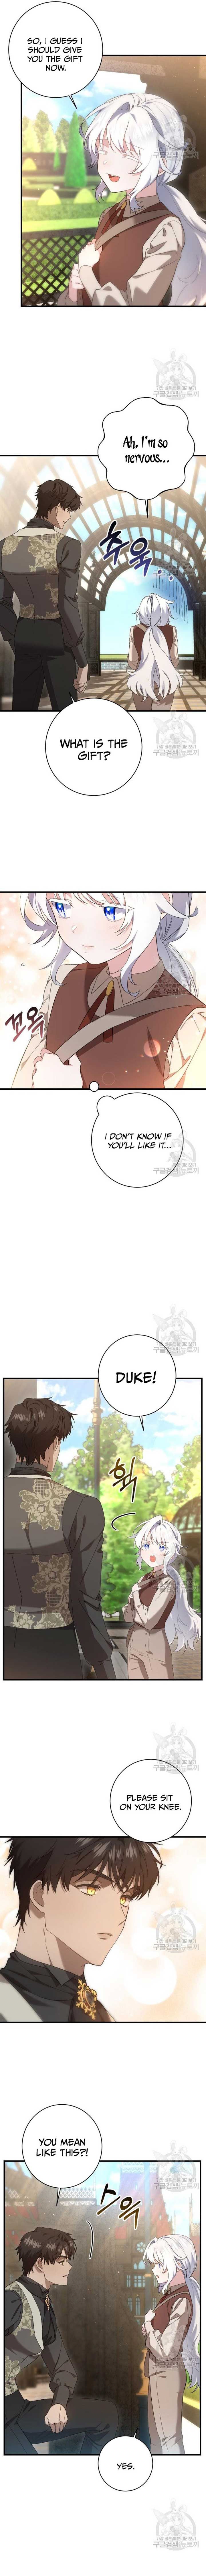 The duke picked up something in the forest Chapter 23 - Page 11